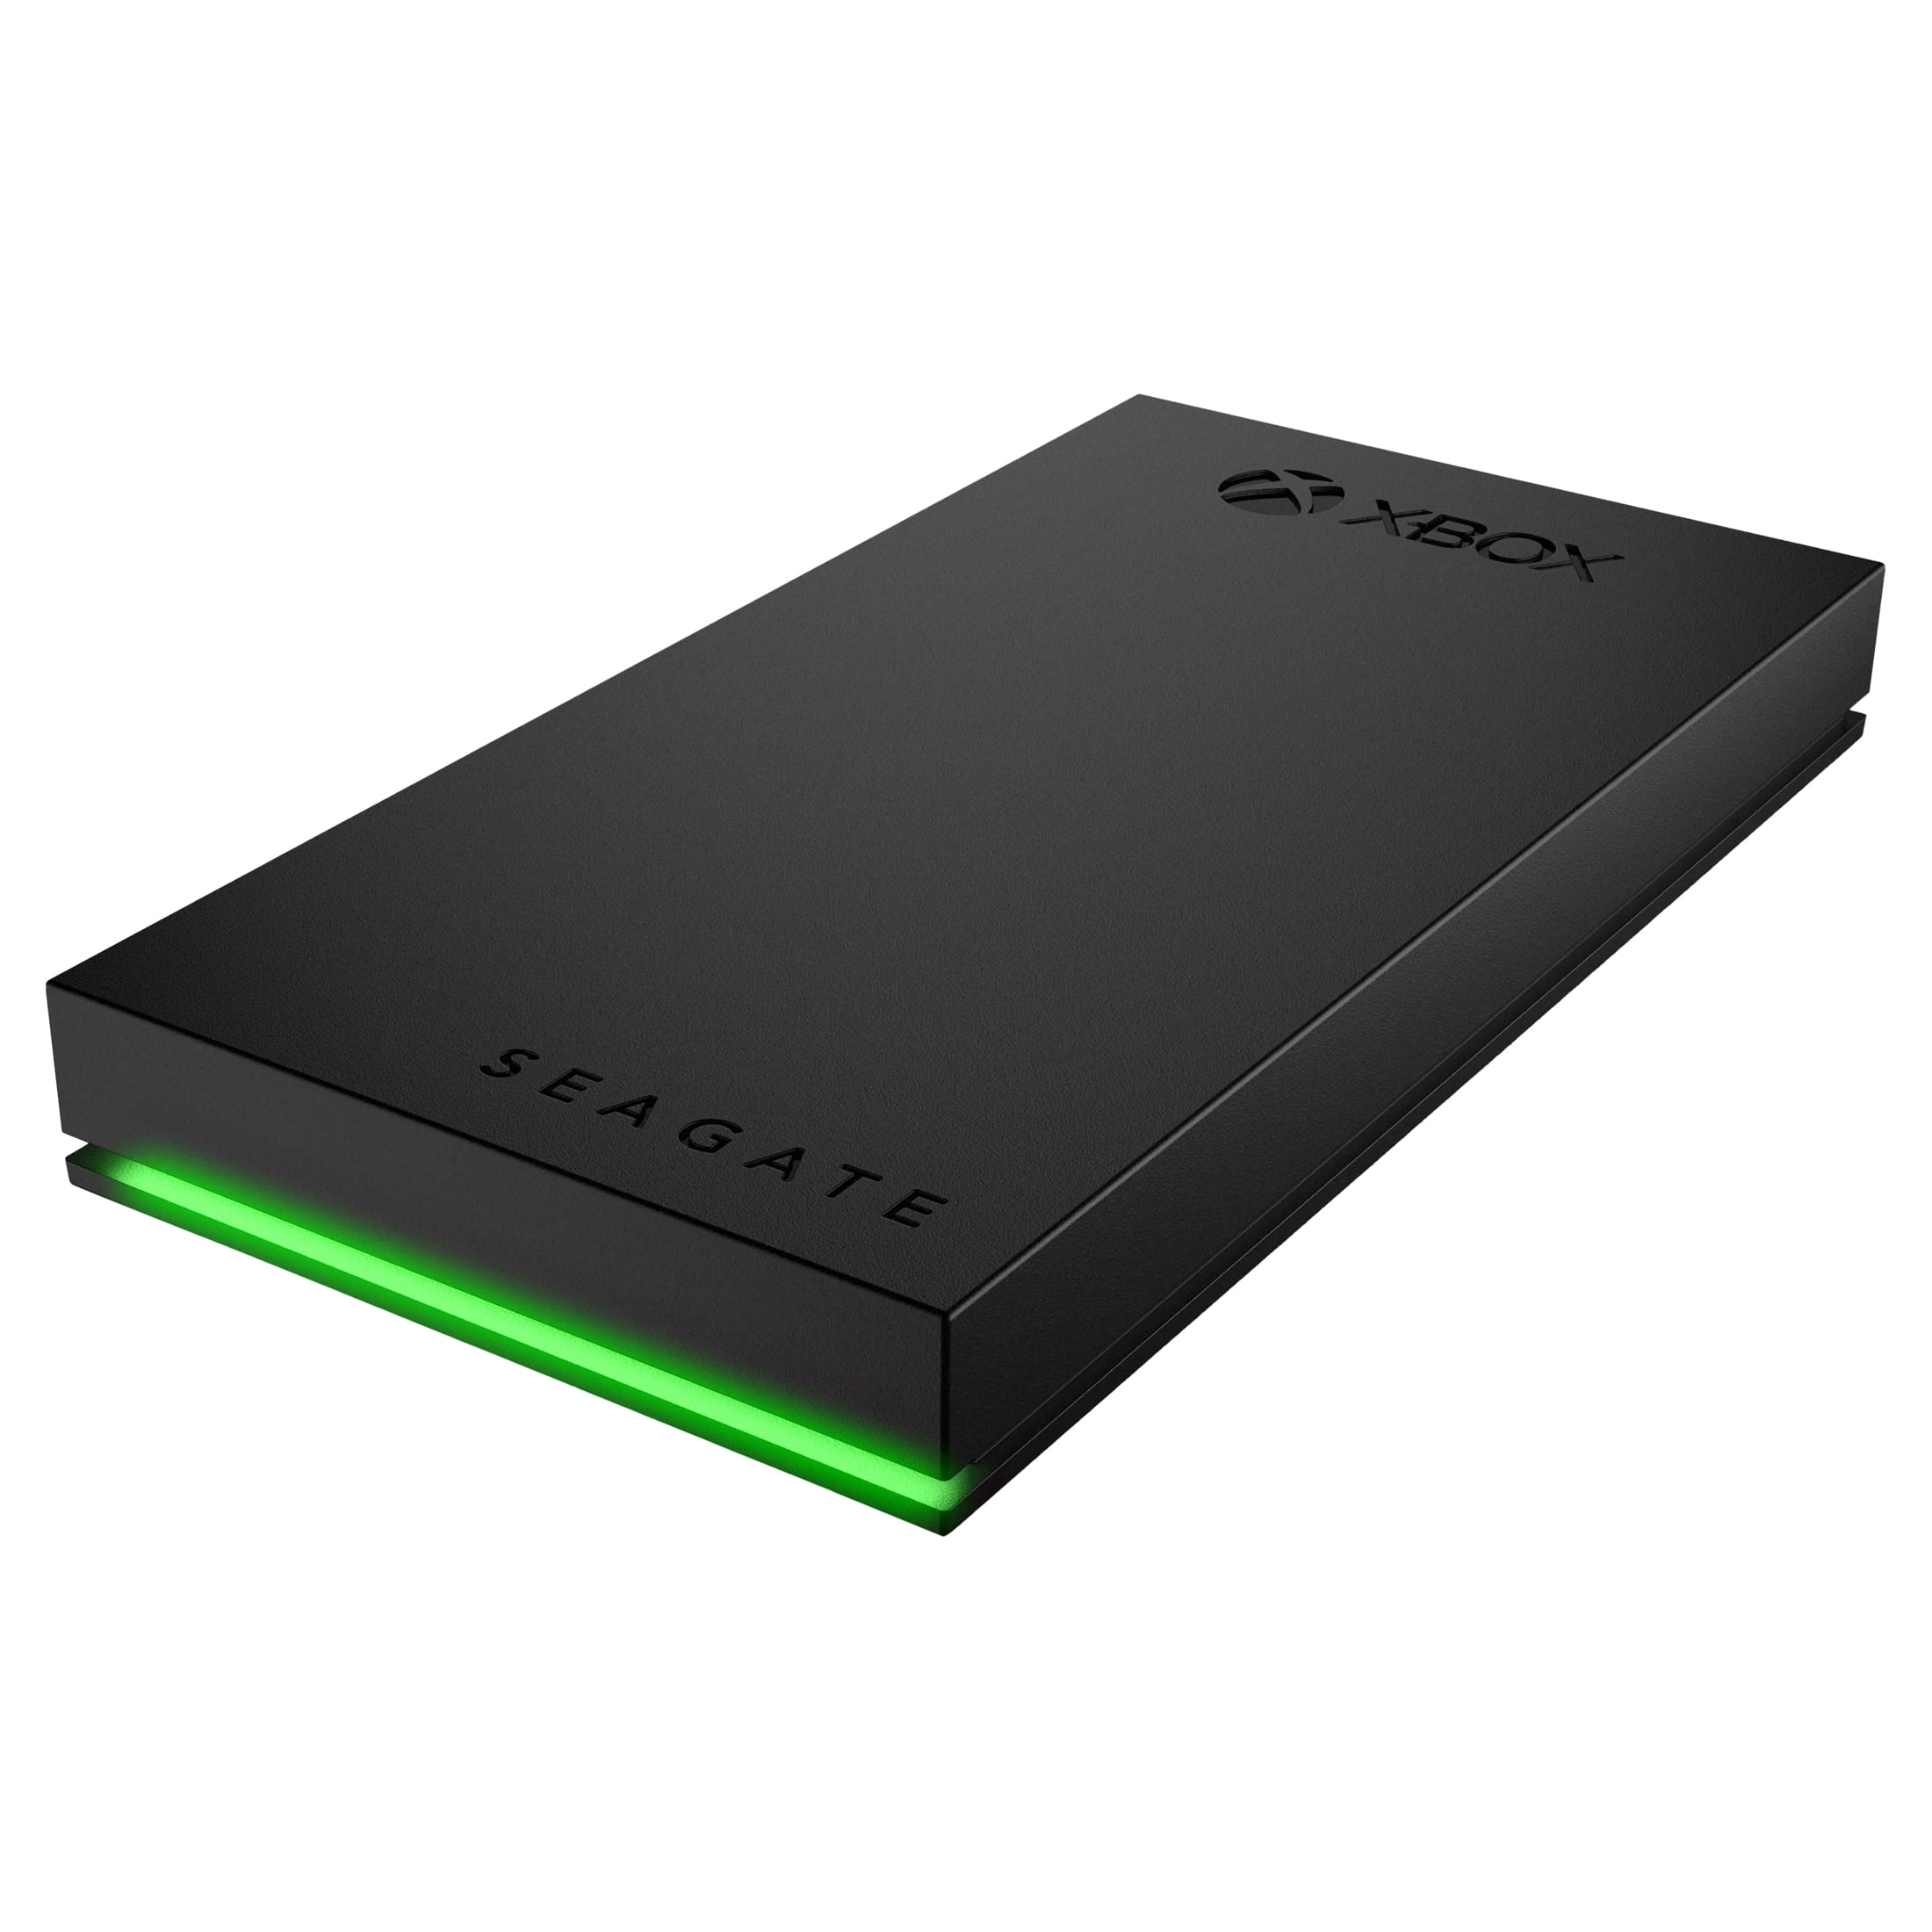 Xbox Serie S+ Seagate 2TB game drive bundle. Is this worth it for 290$ USD?  Its an  prime deal : r/xboxone